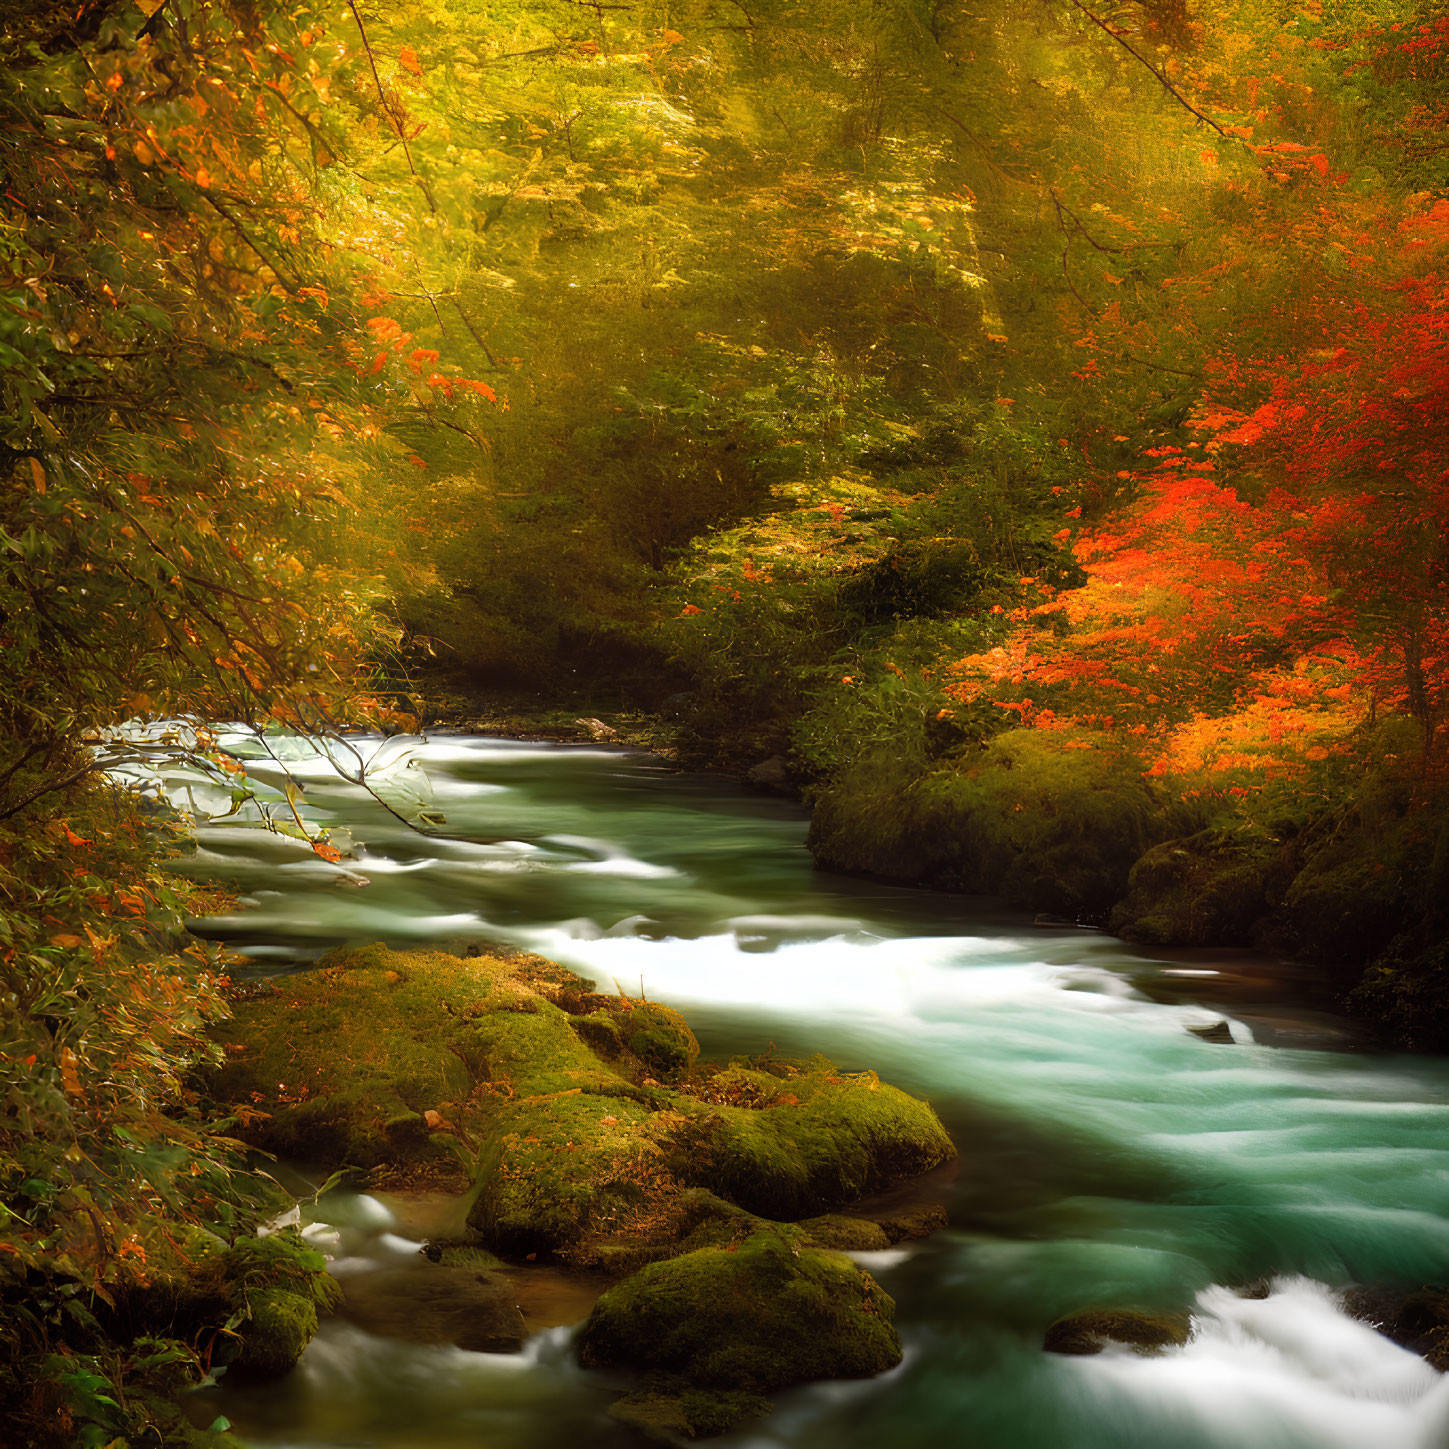 Tranquil river in vibrant autumn forest with green, orange, and red leaves